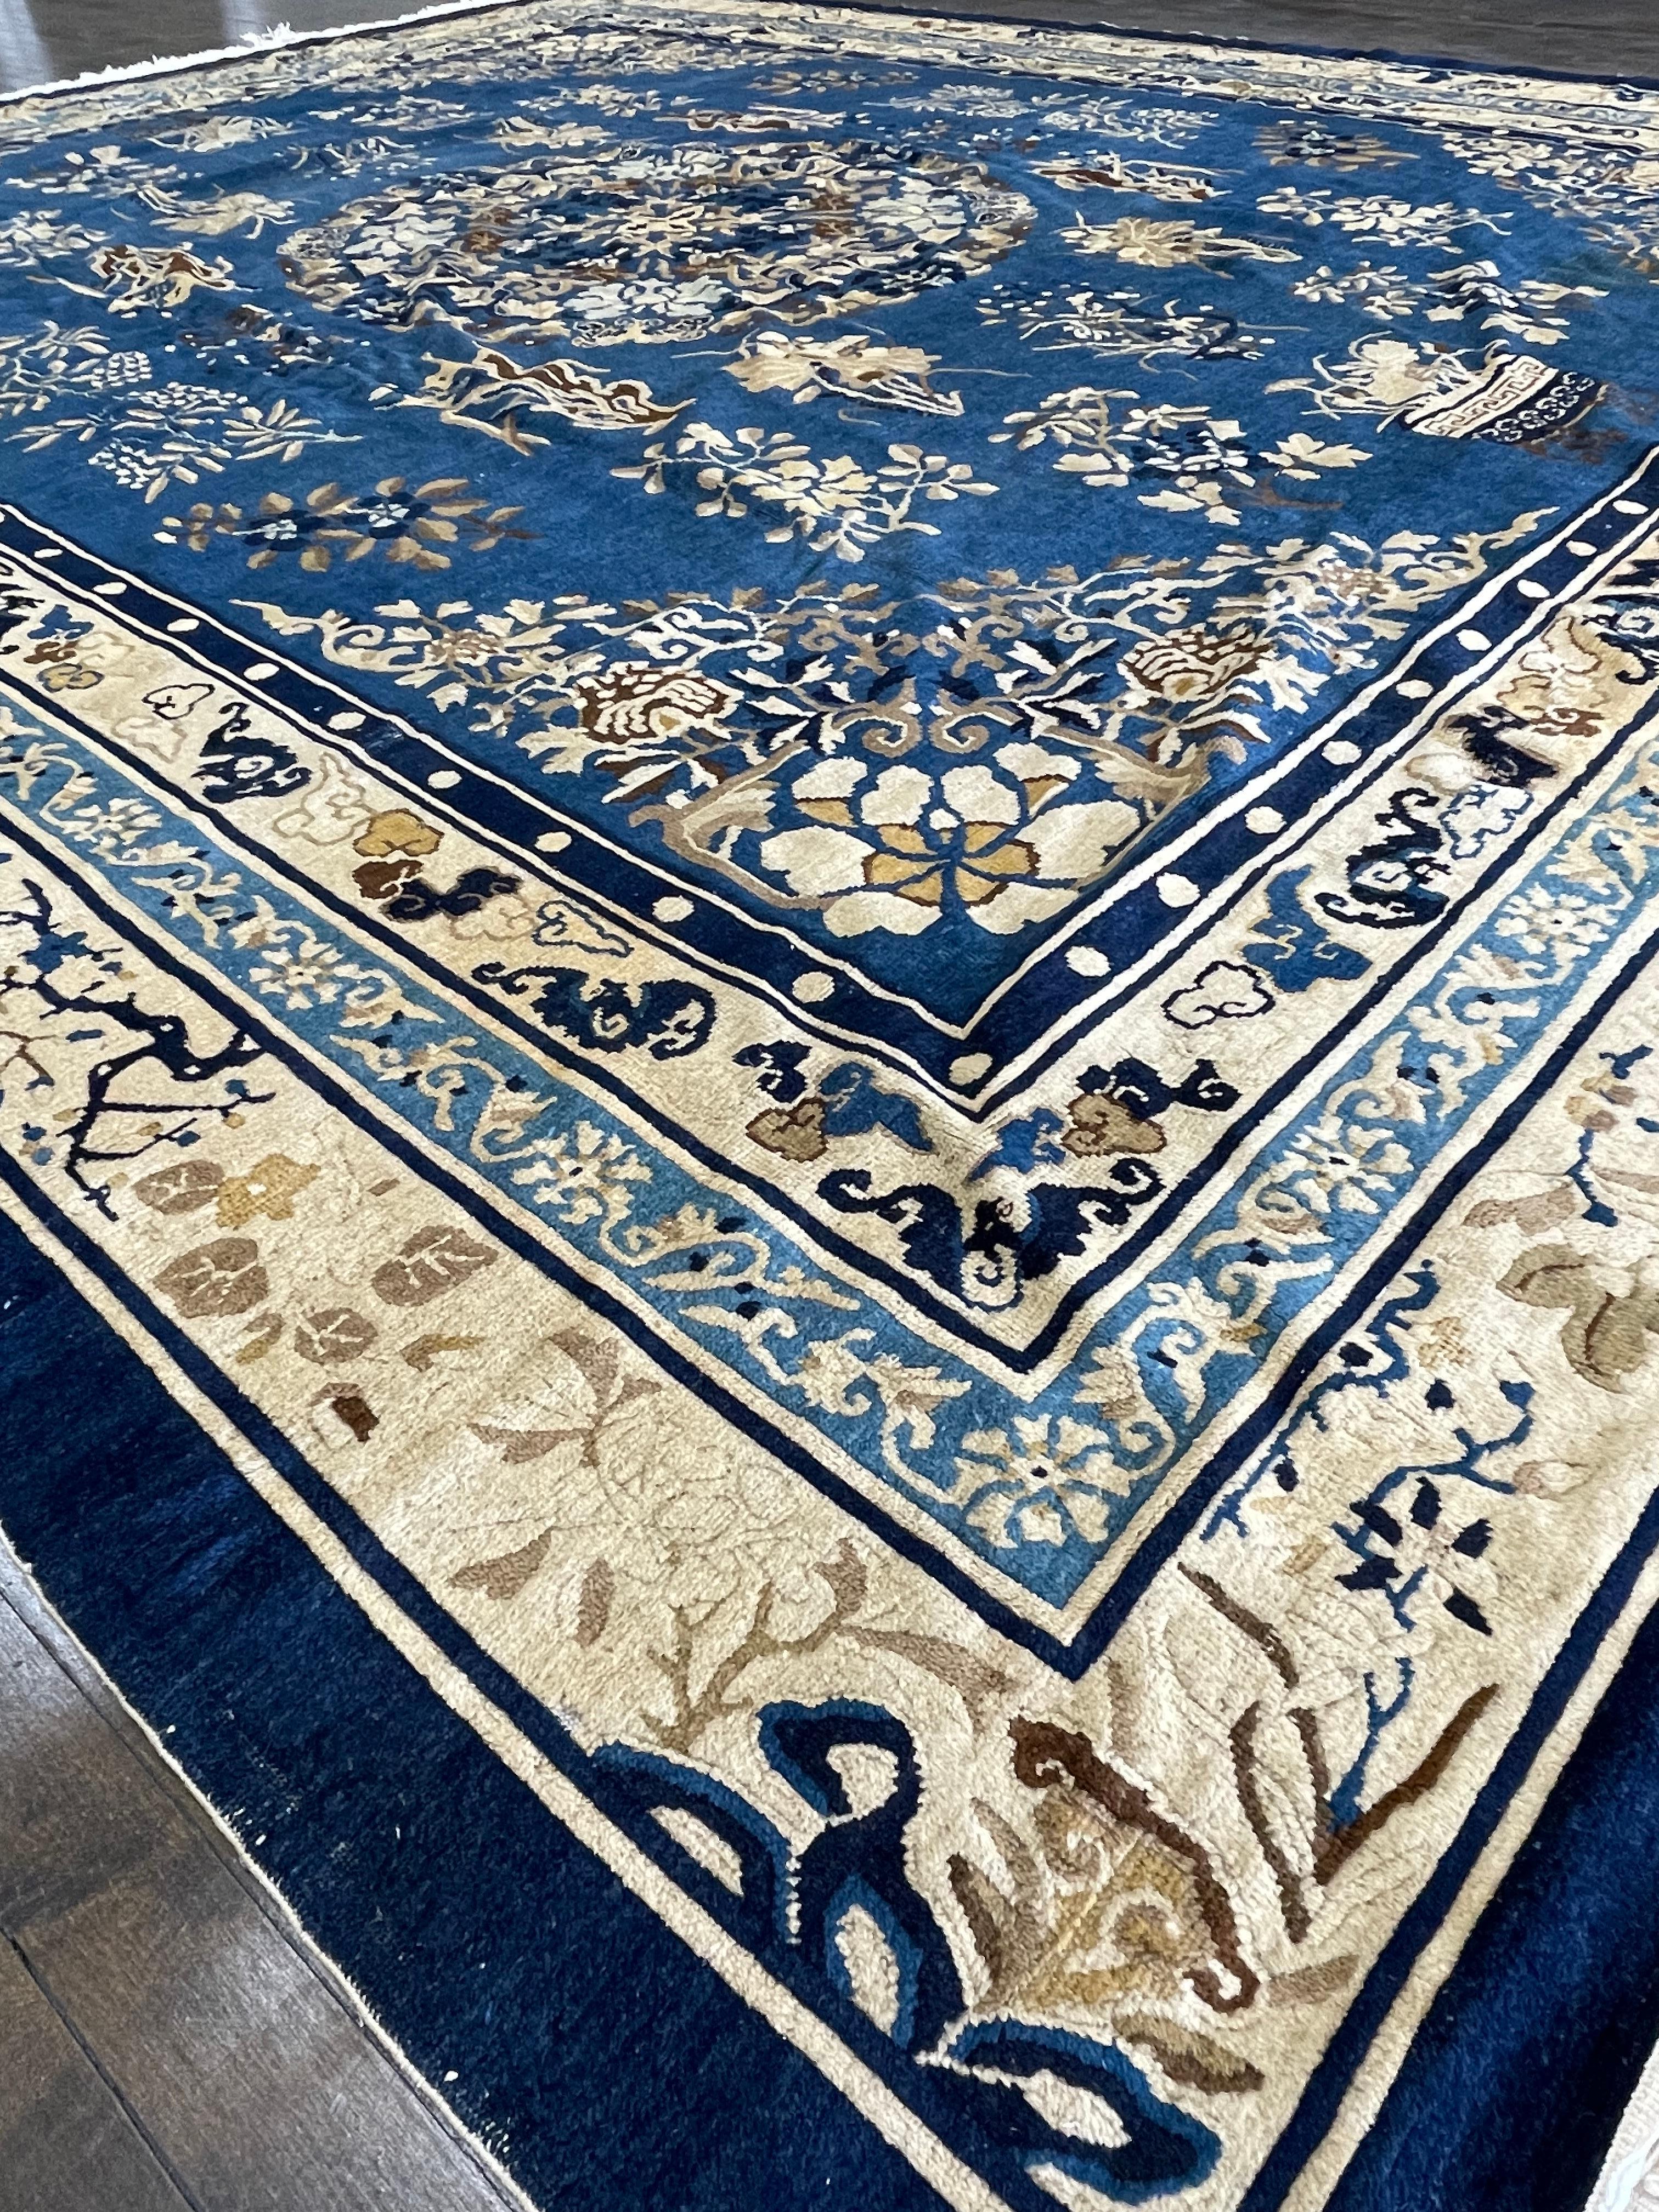 Antique Chinese Mainland Rug circa 1890 In Good Condition For Sale In Morton Grove, IL